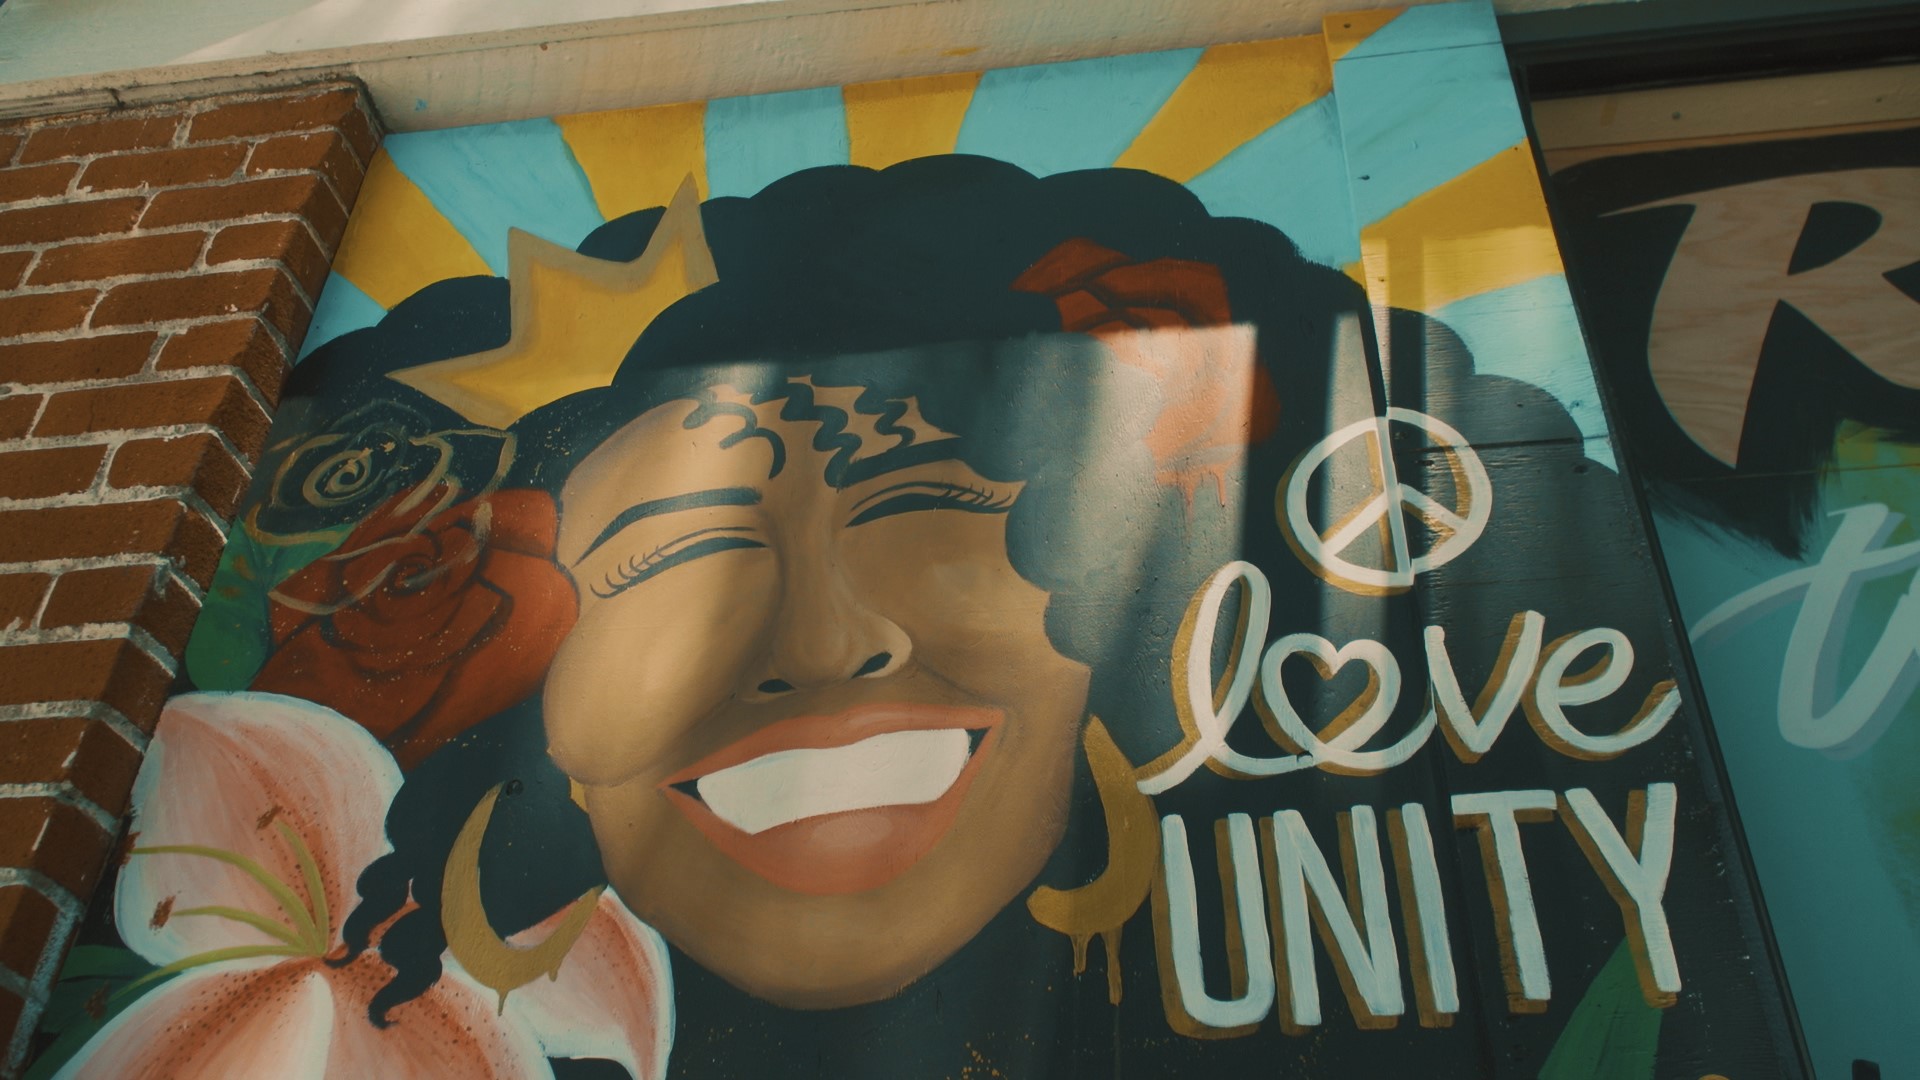 Artists have been painting boarded up businesses in Sacramento to brighten up their city. Proceeds for sold pieces to go to local Black youth organizations.